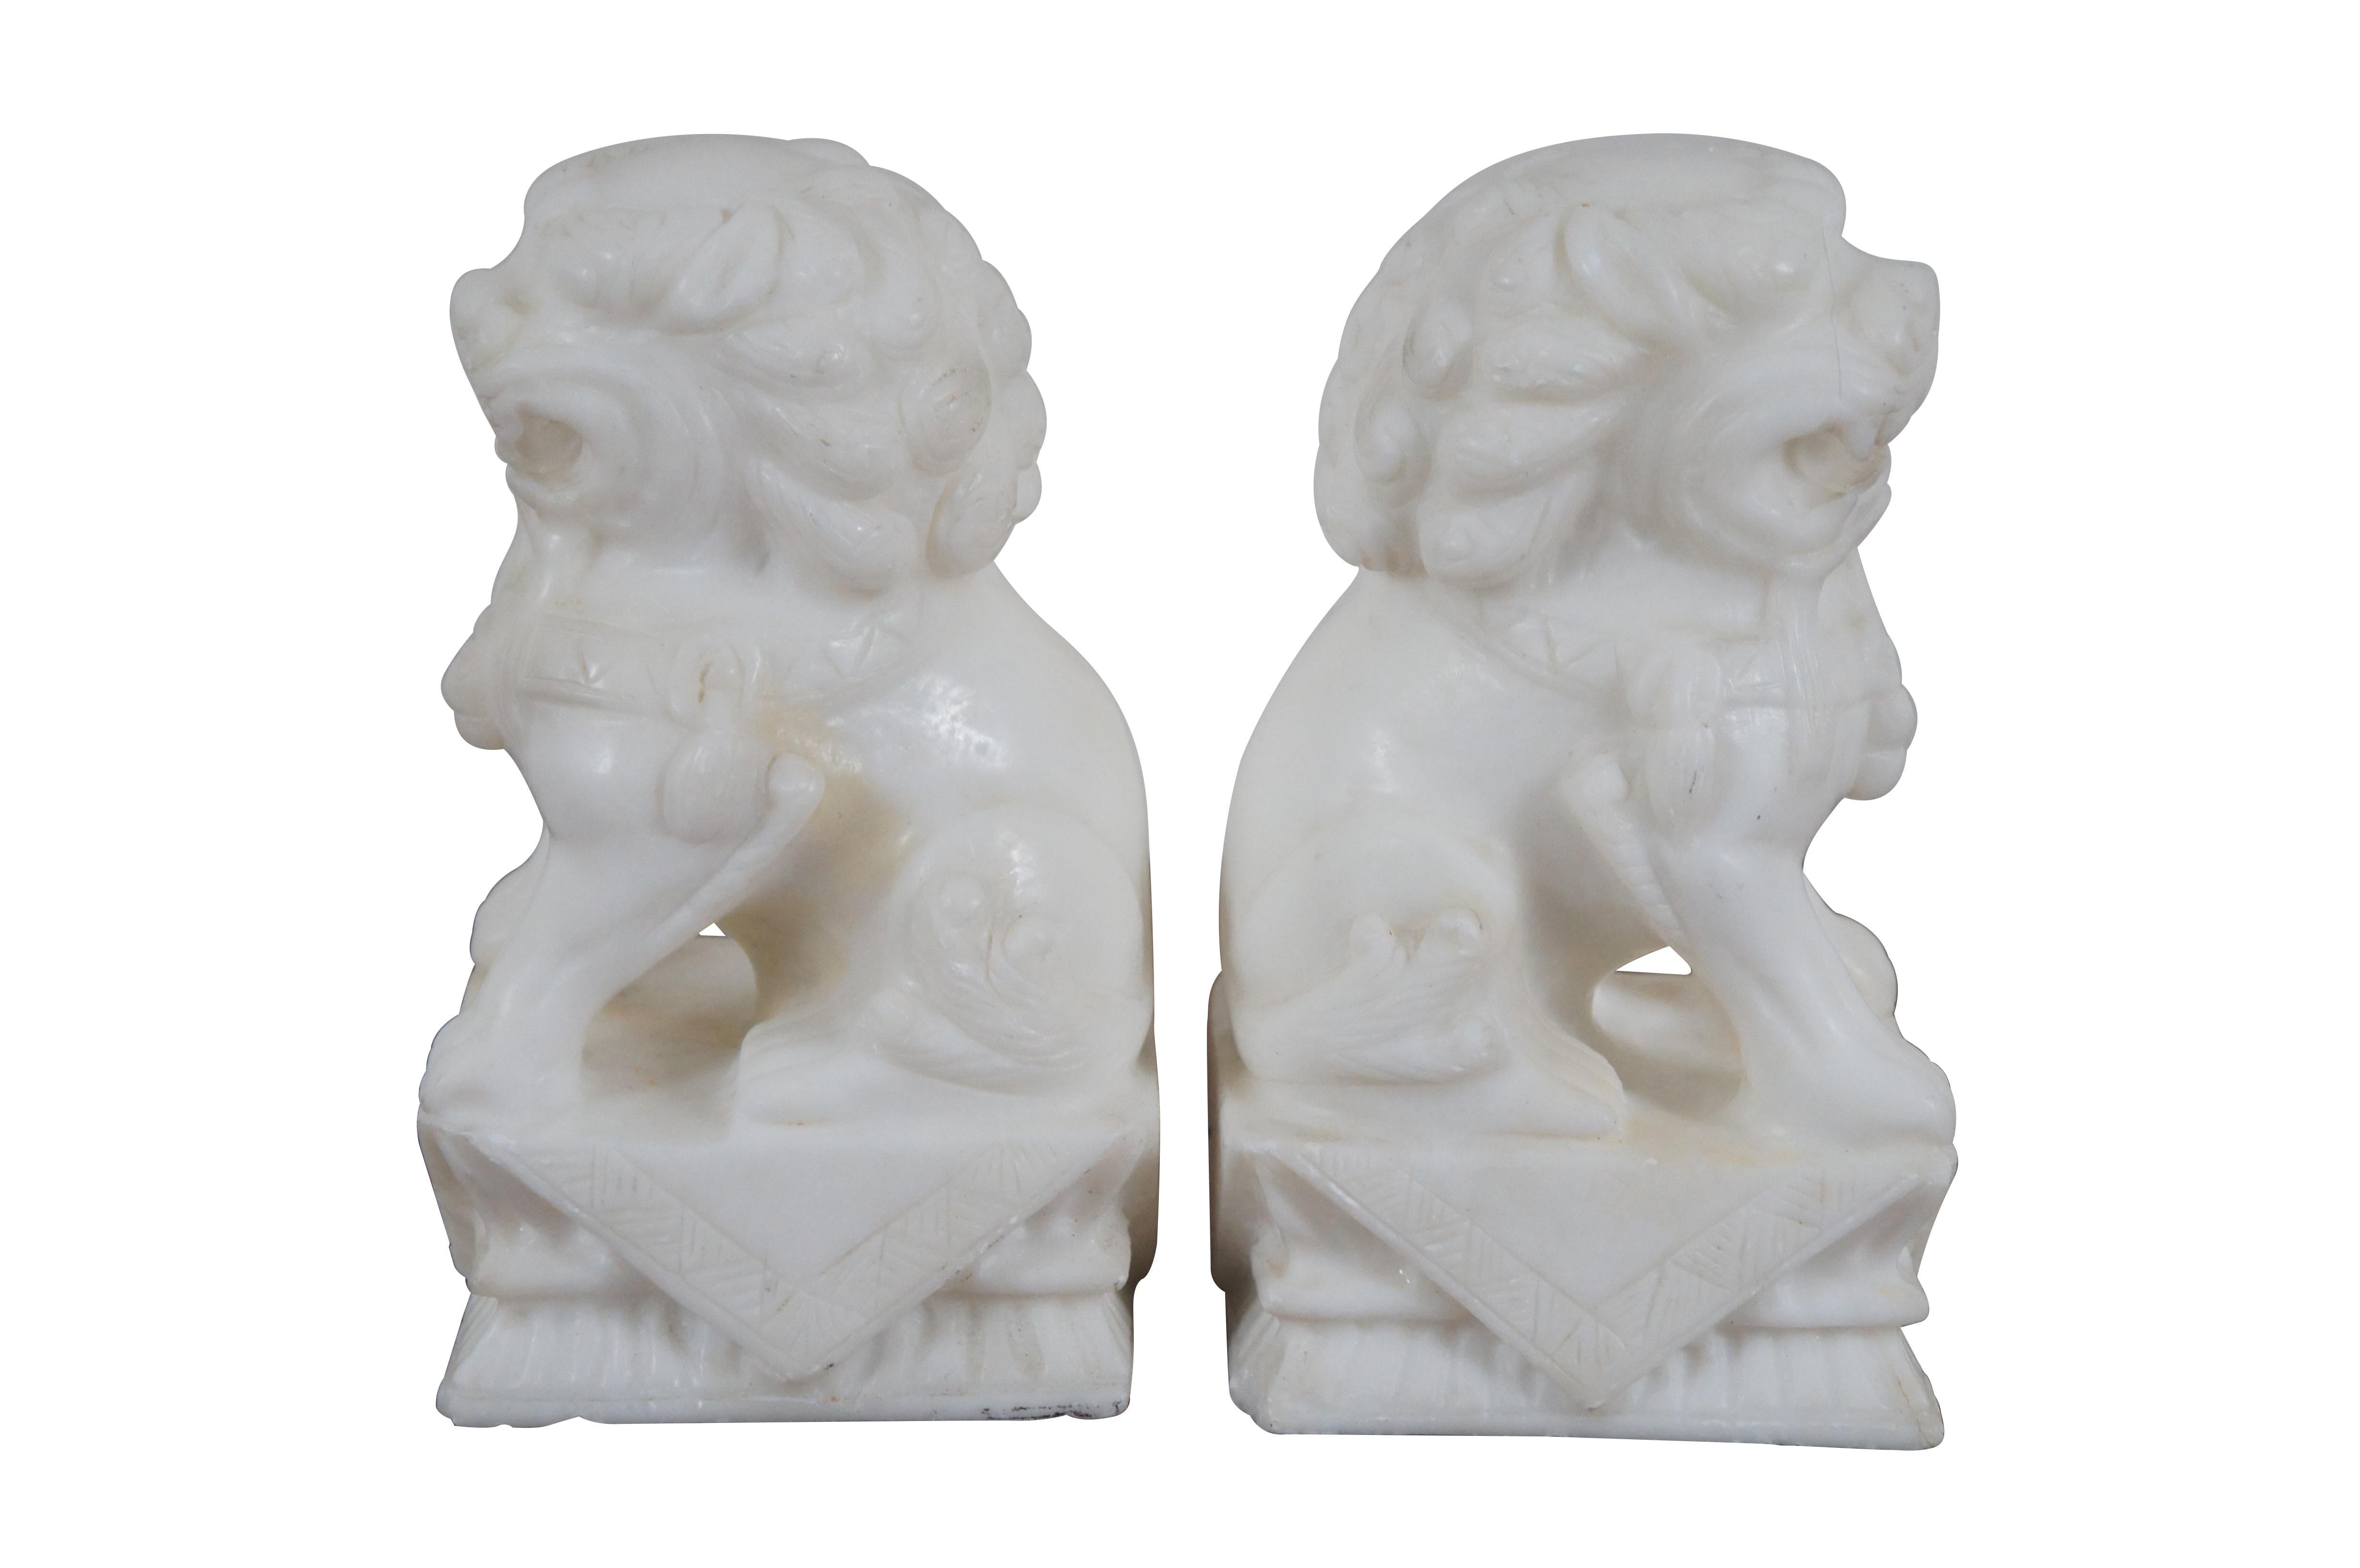 Pair of white marble carved stone fu dogs / Chinese guardian lion figurines or bookends.

Dimensions:
4